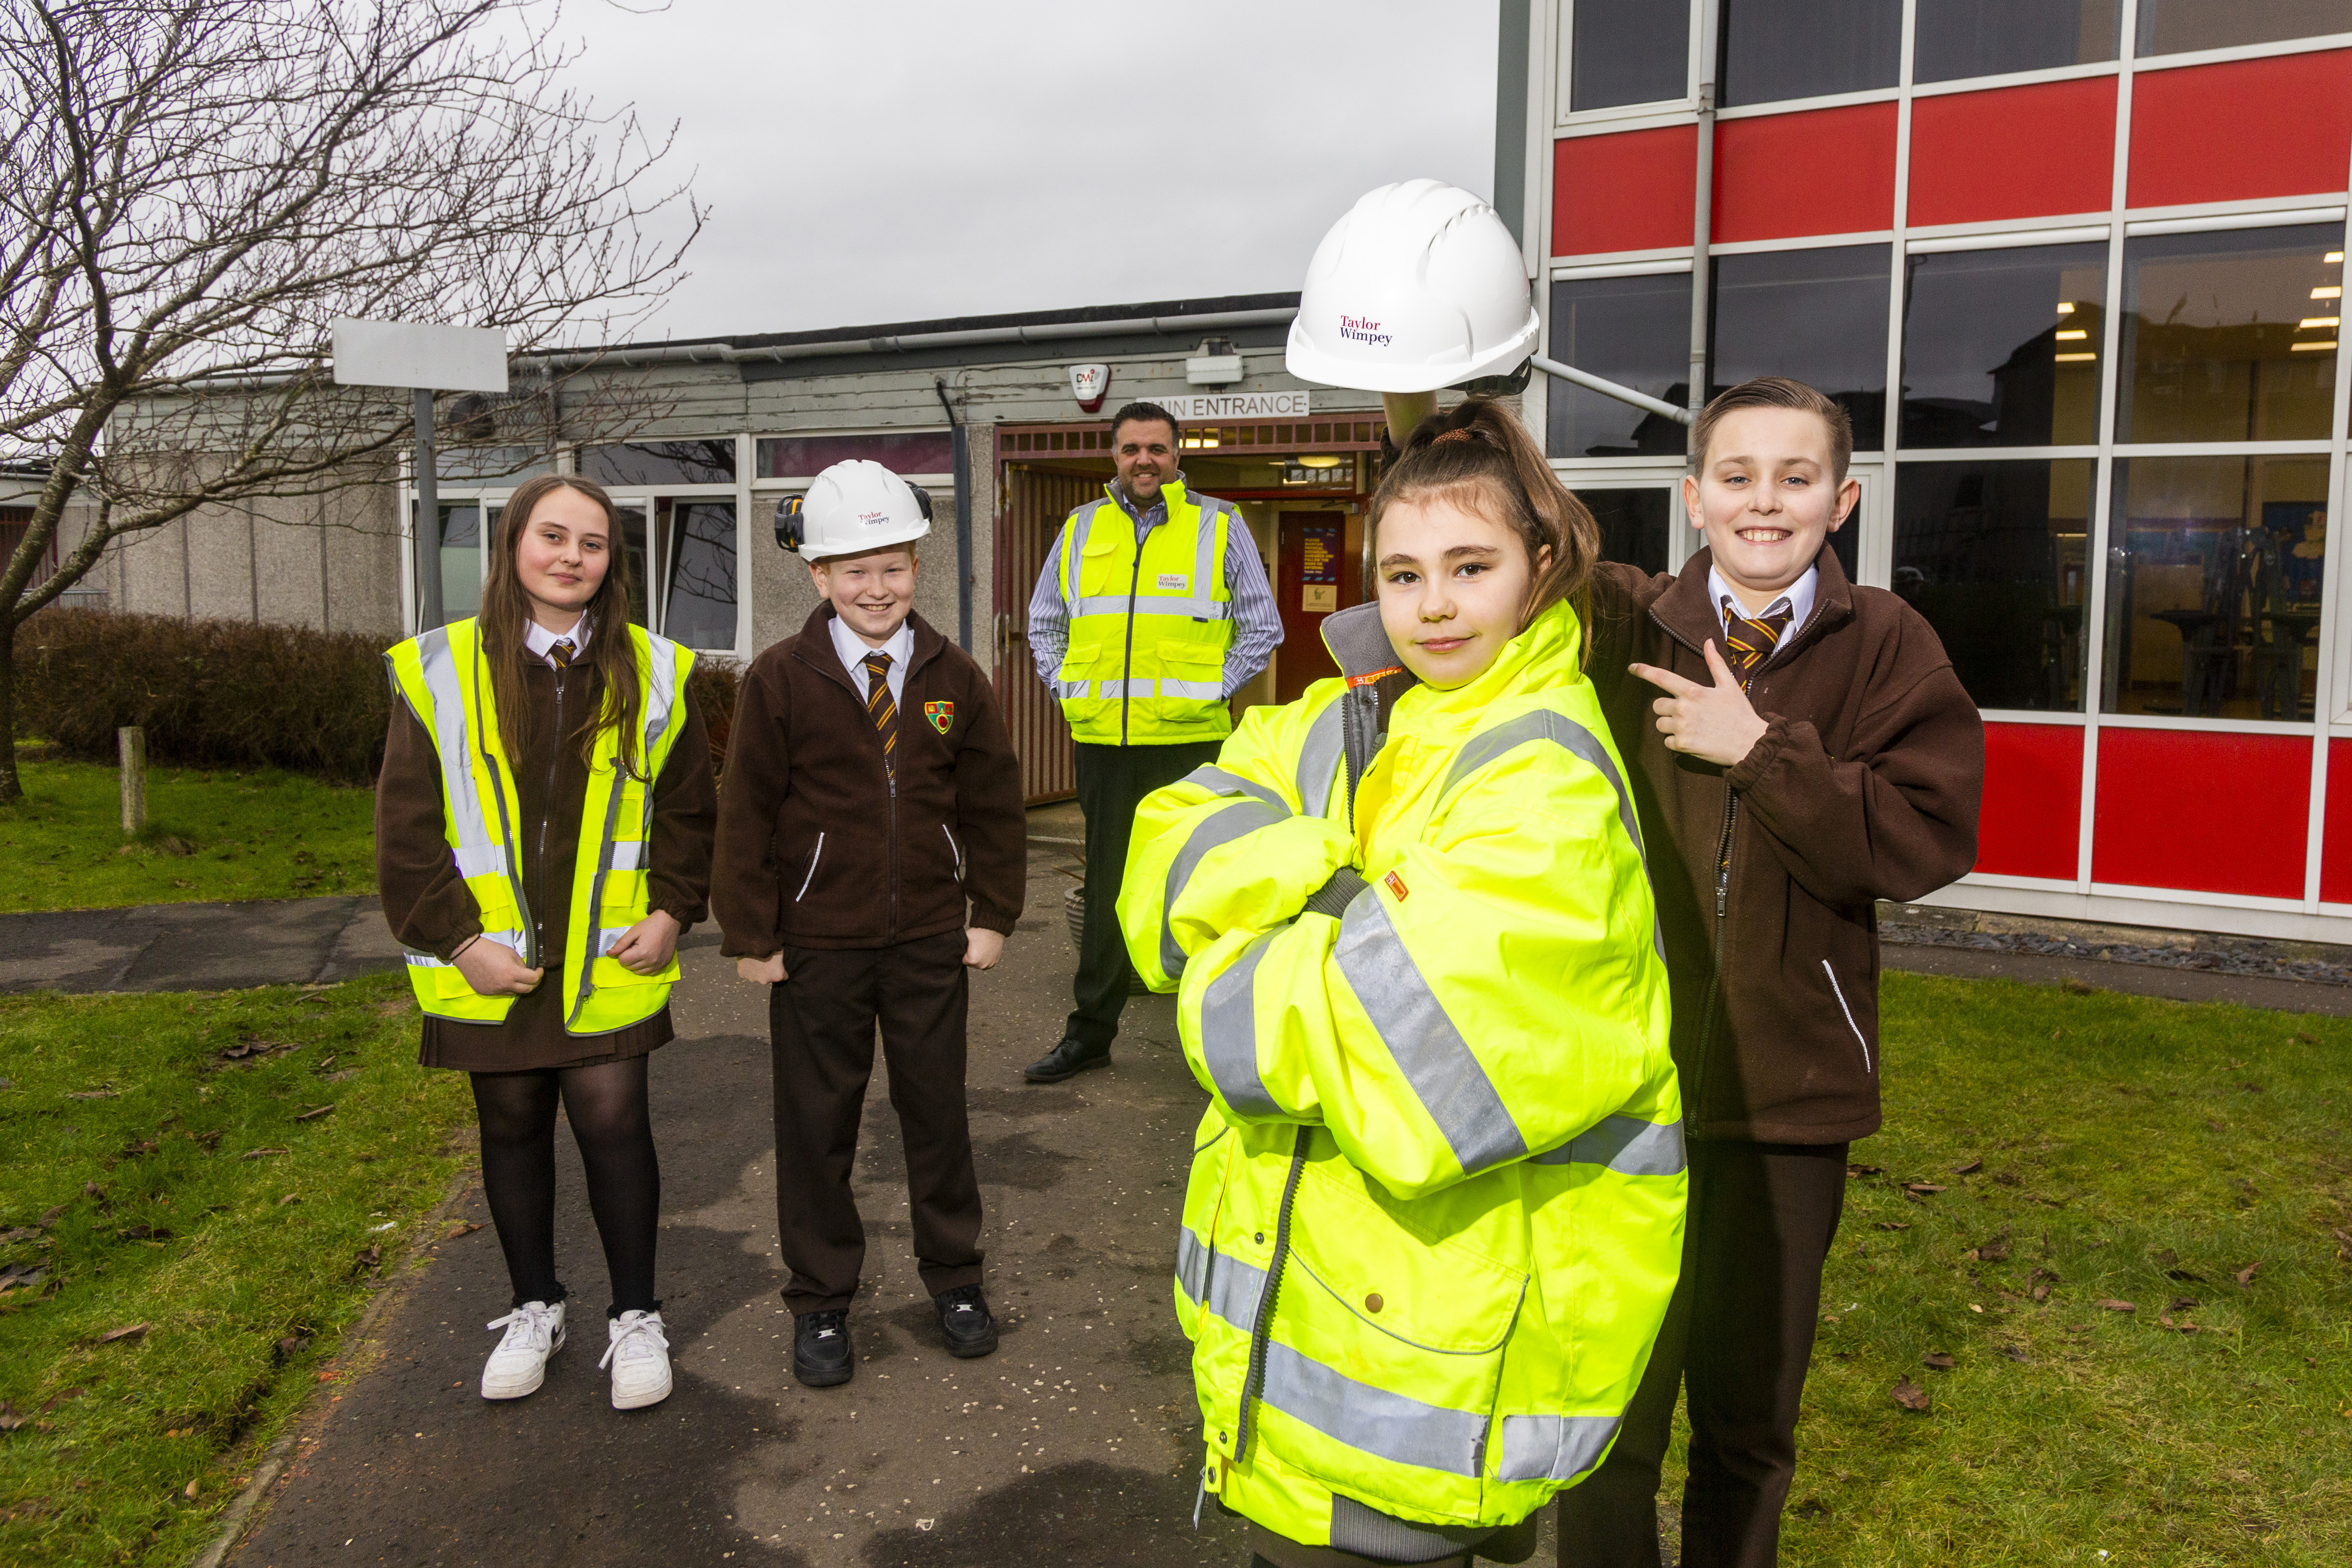 Taylor Wimpey gives lesson in safety to local school children in Moodiesburn